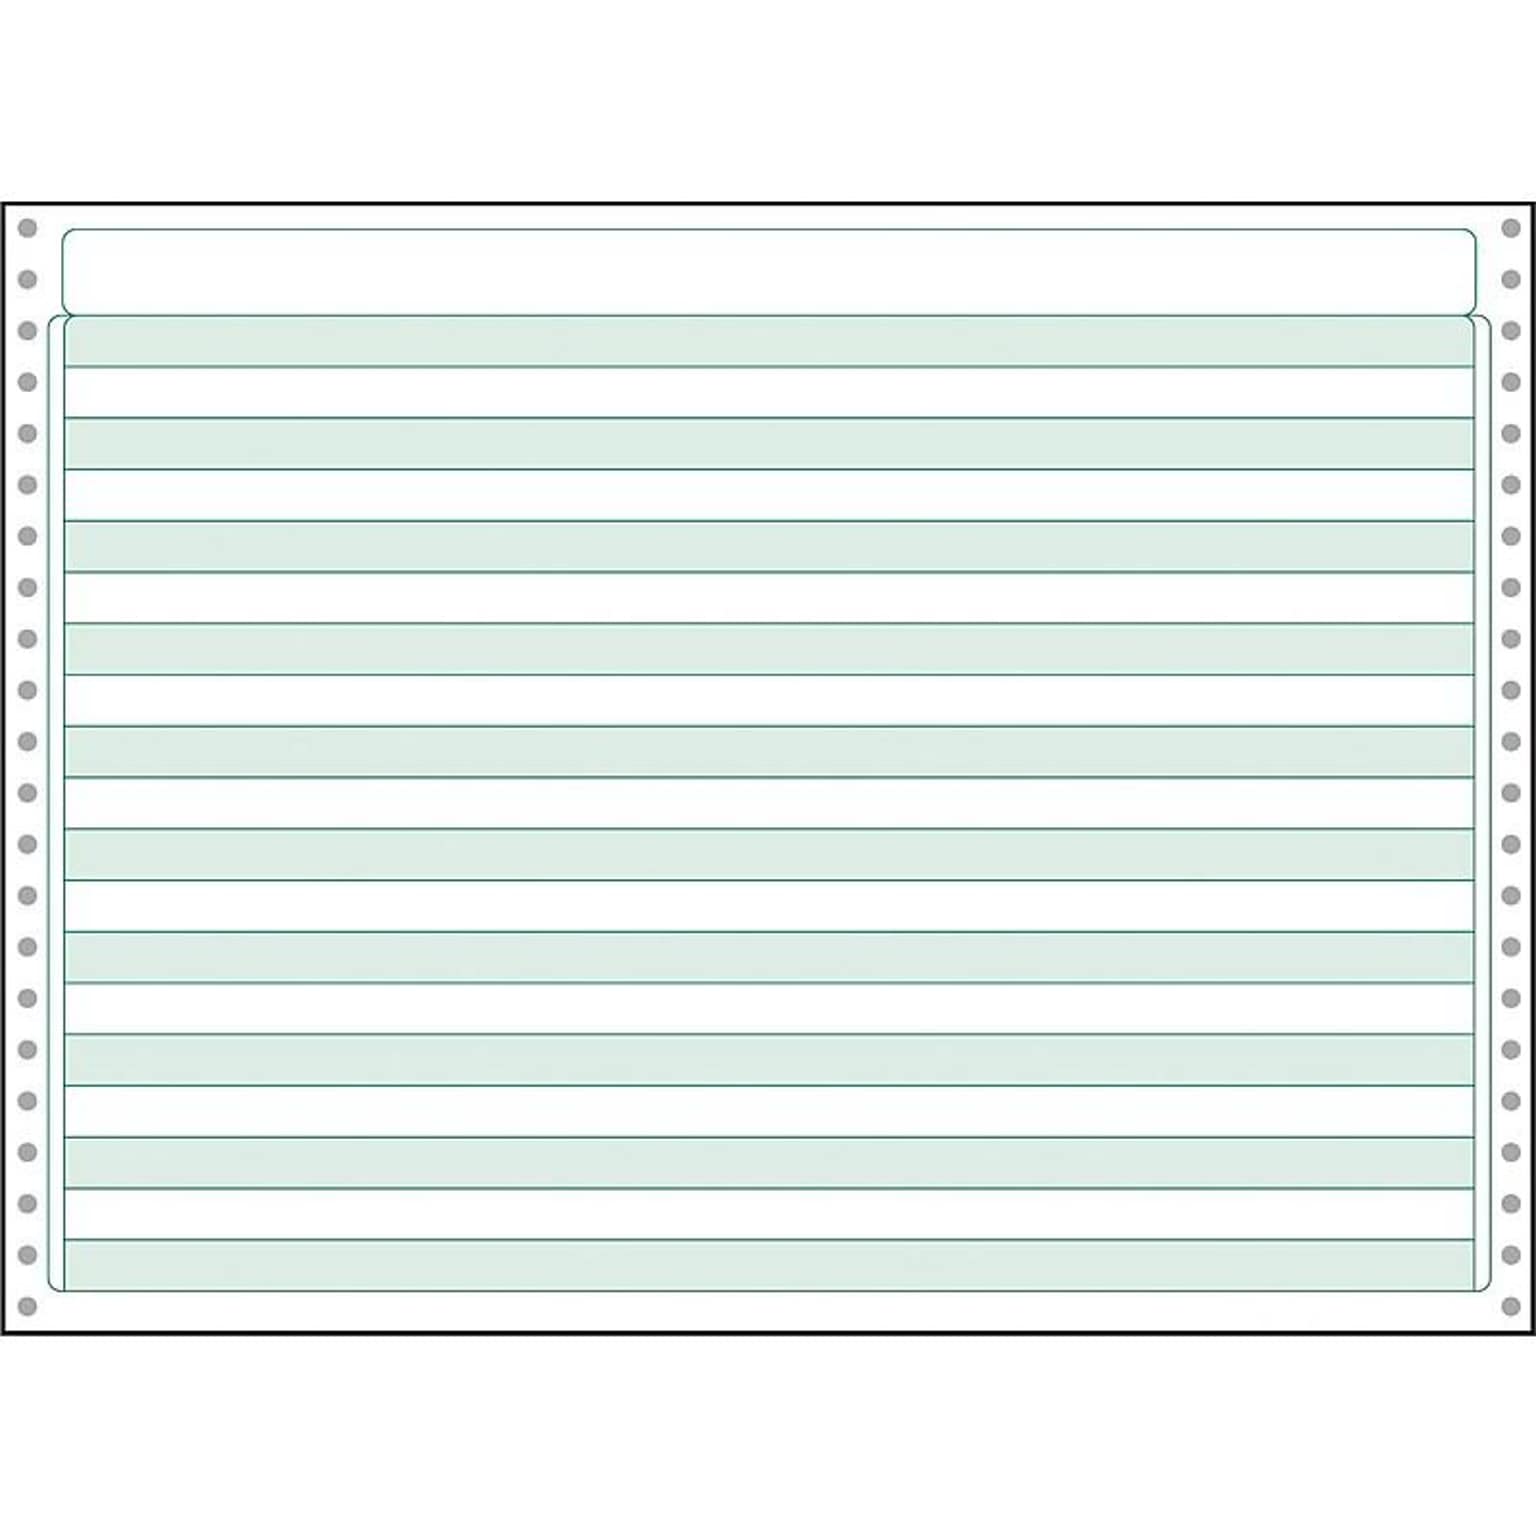 Printworks® Professional Continuous Computer Paper, 20 lbs., 11 x 14.875, Green Bar, 2200 Sheets/Carton (PRB02716)